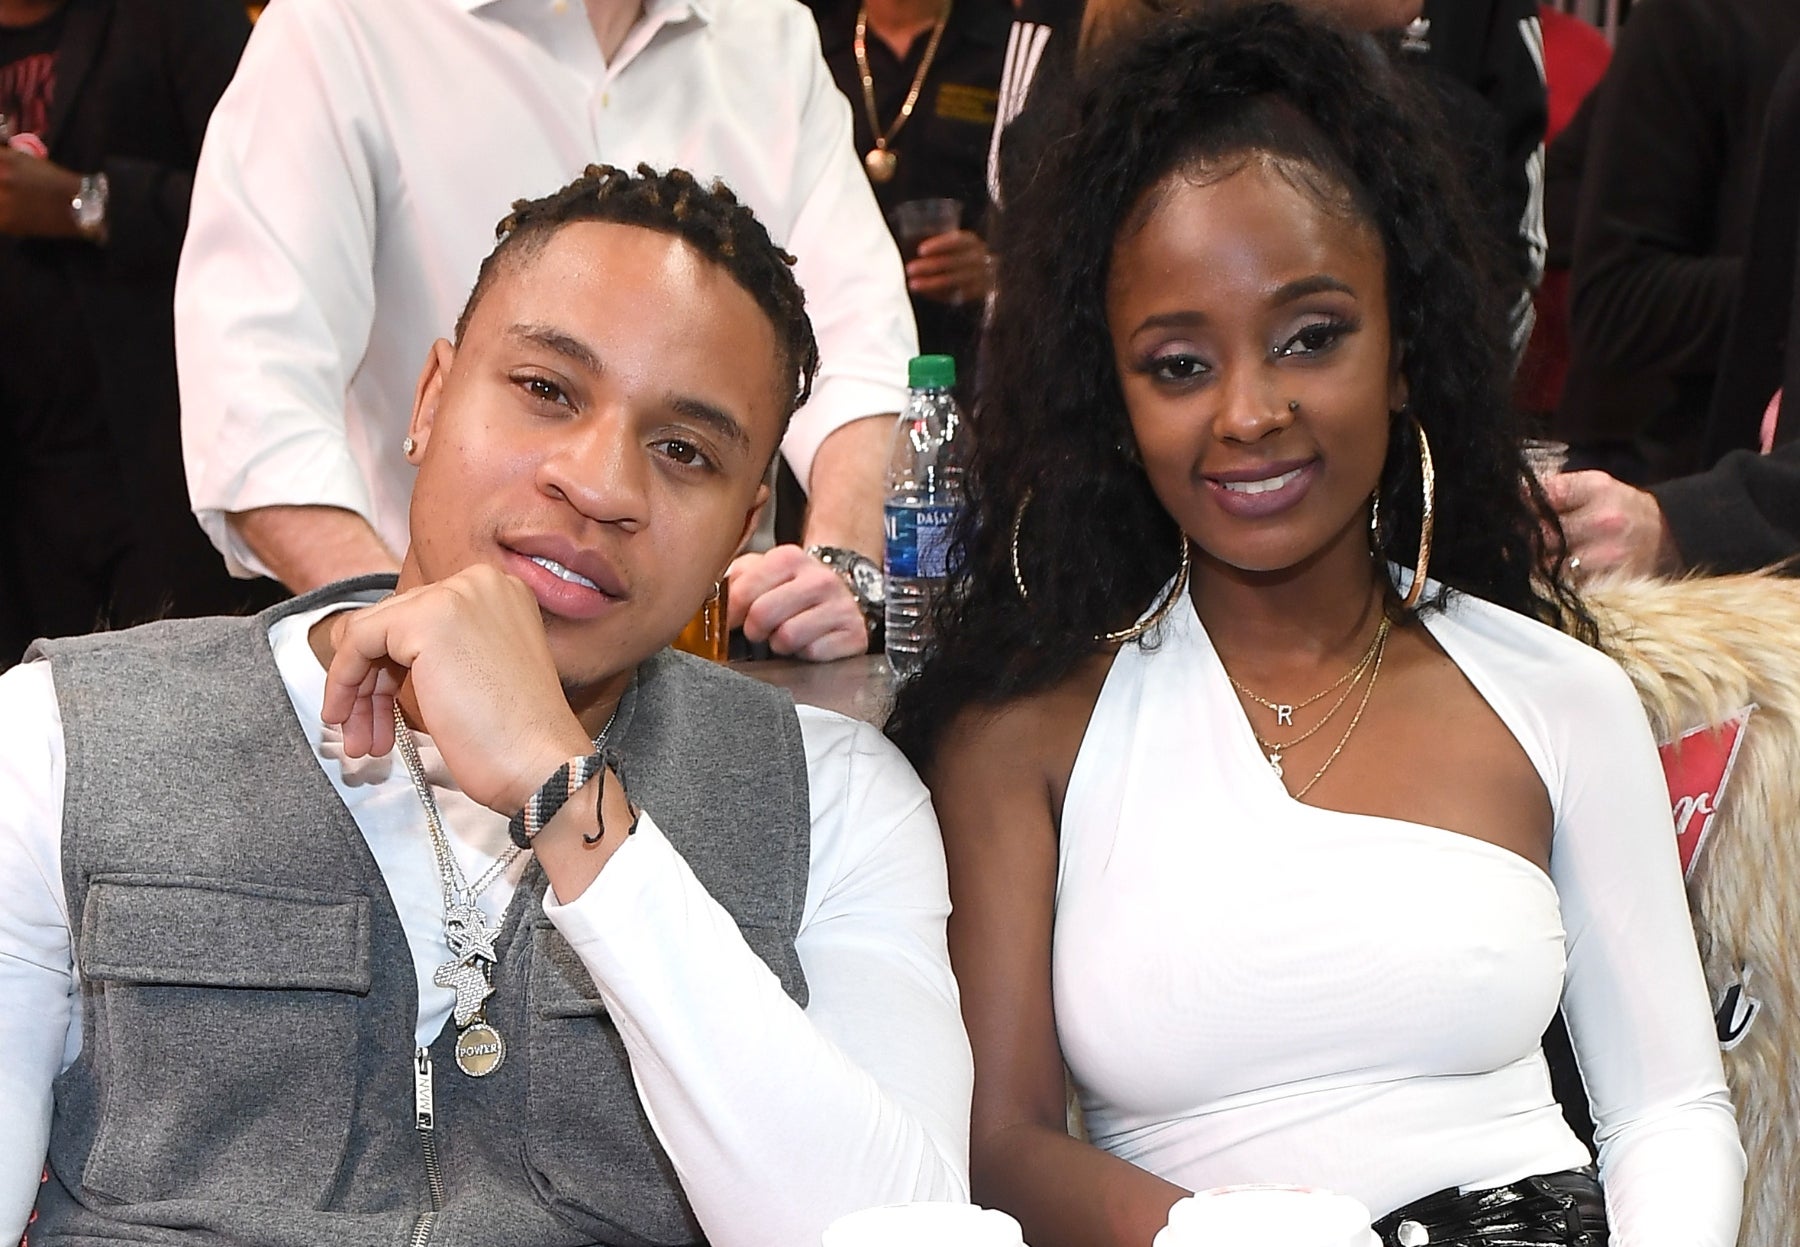 Baby Butterscotch: Rotimi And Fiancé Vanessa Mdee Just Welcomed Their Son